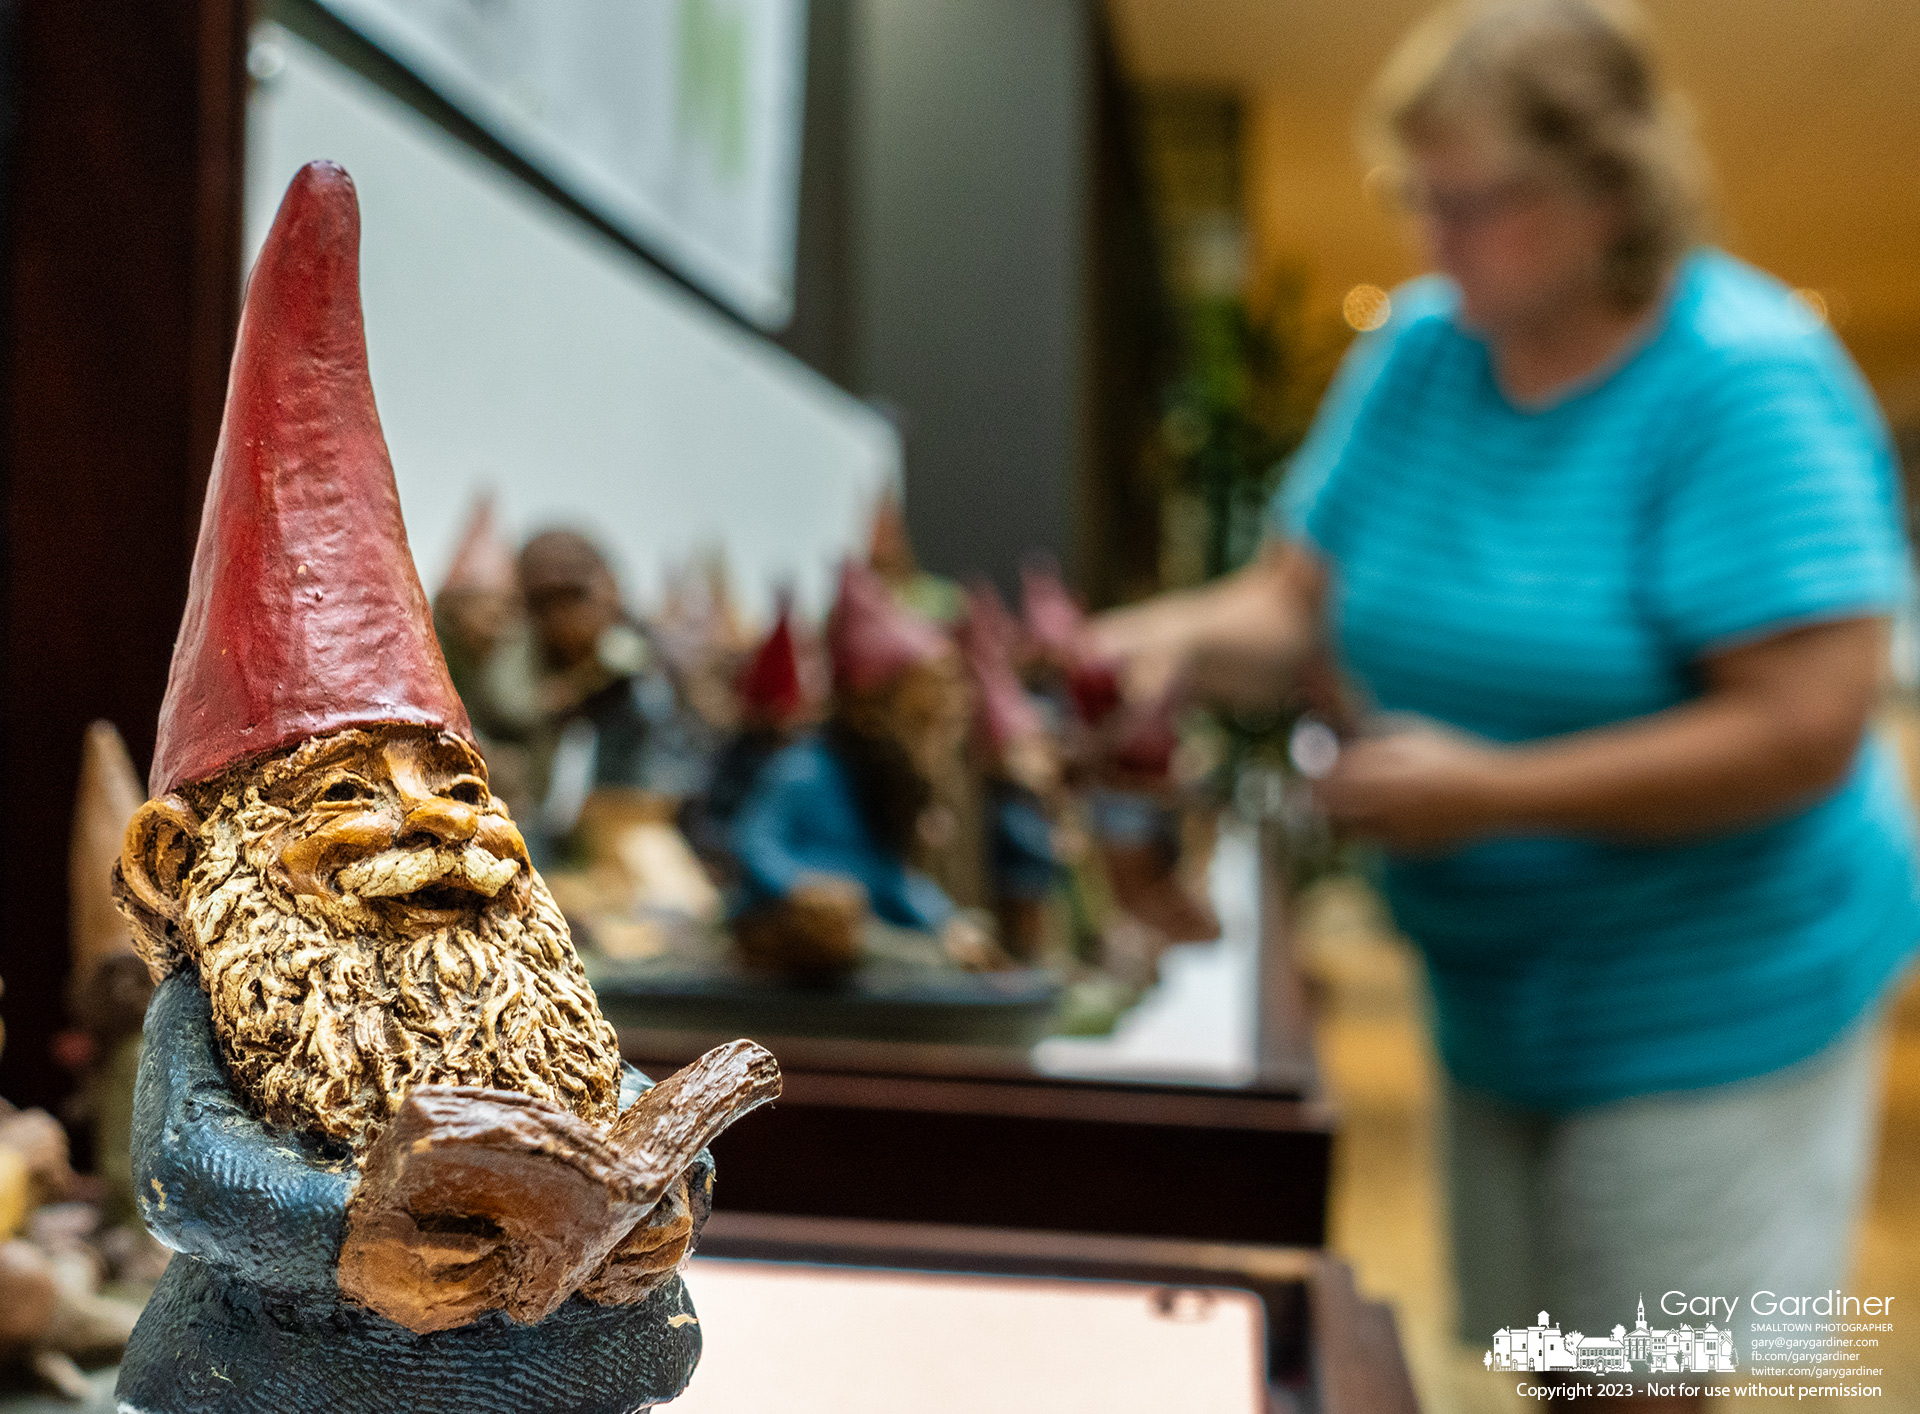 Krista Chrisman arranges her 312 Tom Clark pecan resin gnome figurines in the display cases at the Westerville Public Library where they will be on exhibit for several weeks. My Final Photo for September 5, 2023.